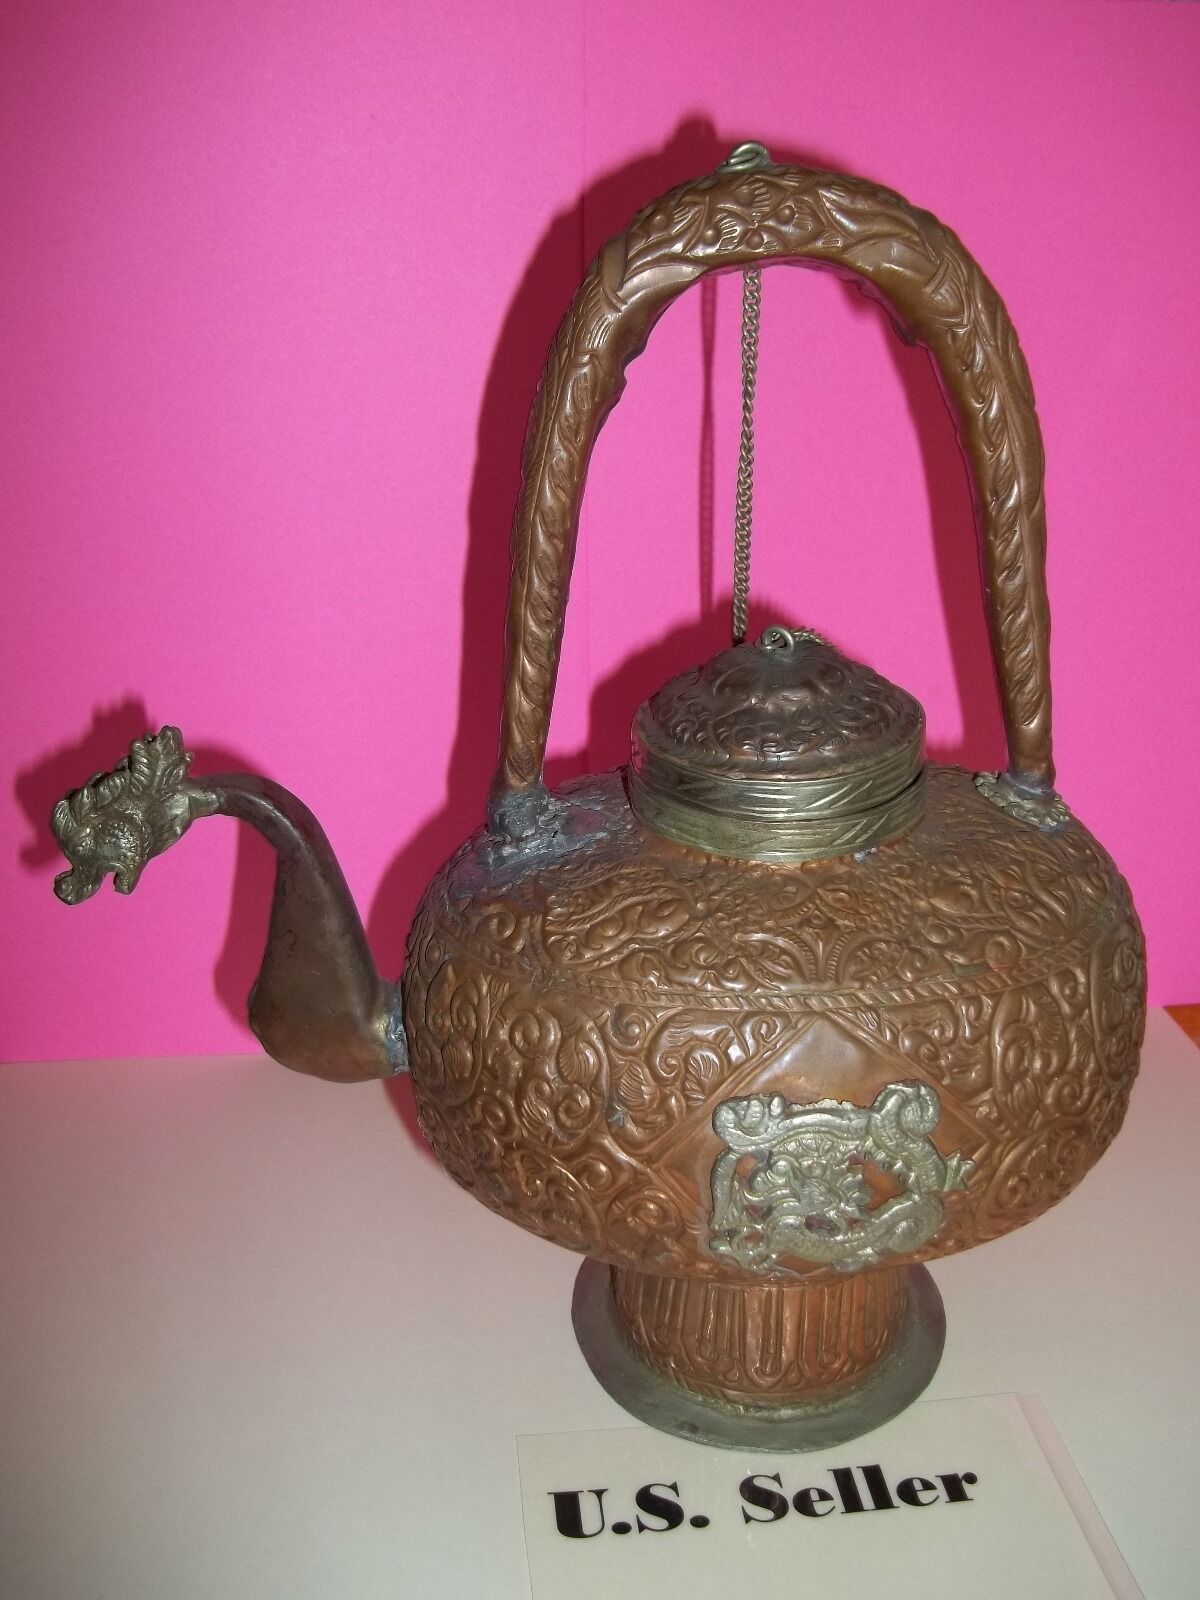 Very Beautiful Antique DragonHead TeaKettle made of copper and silver intricate